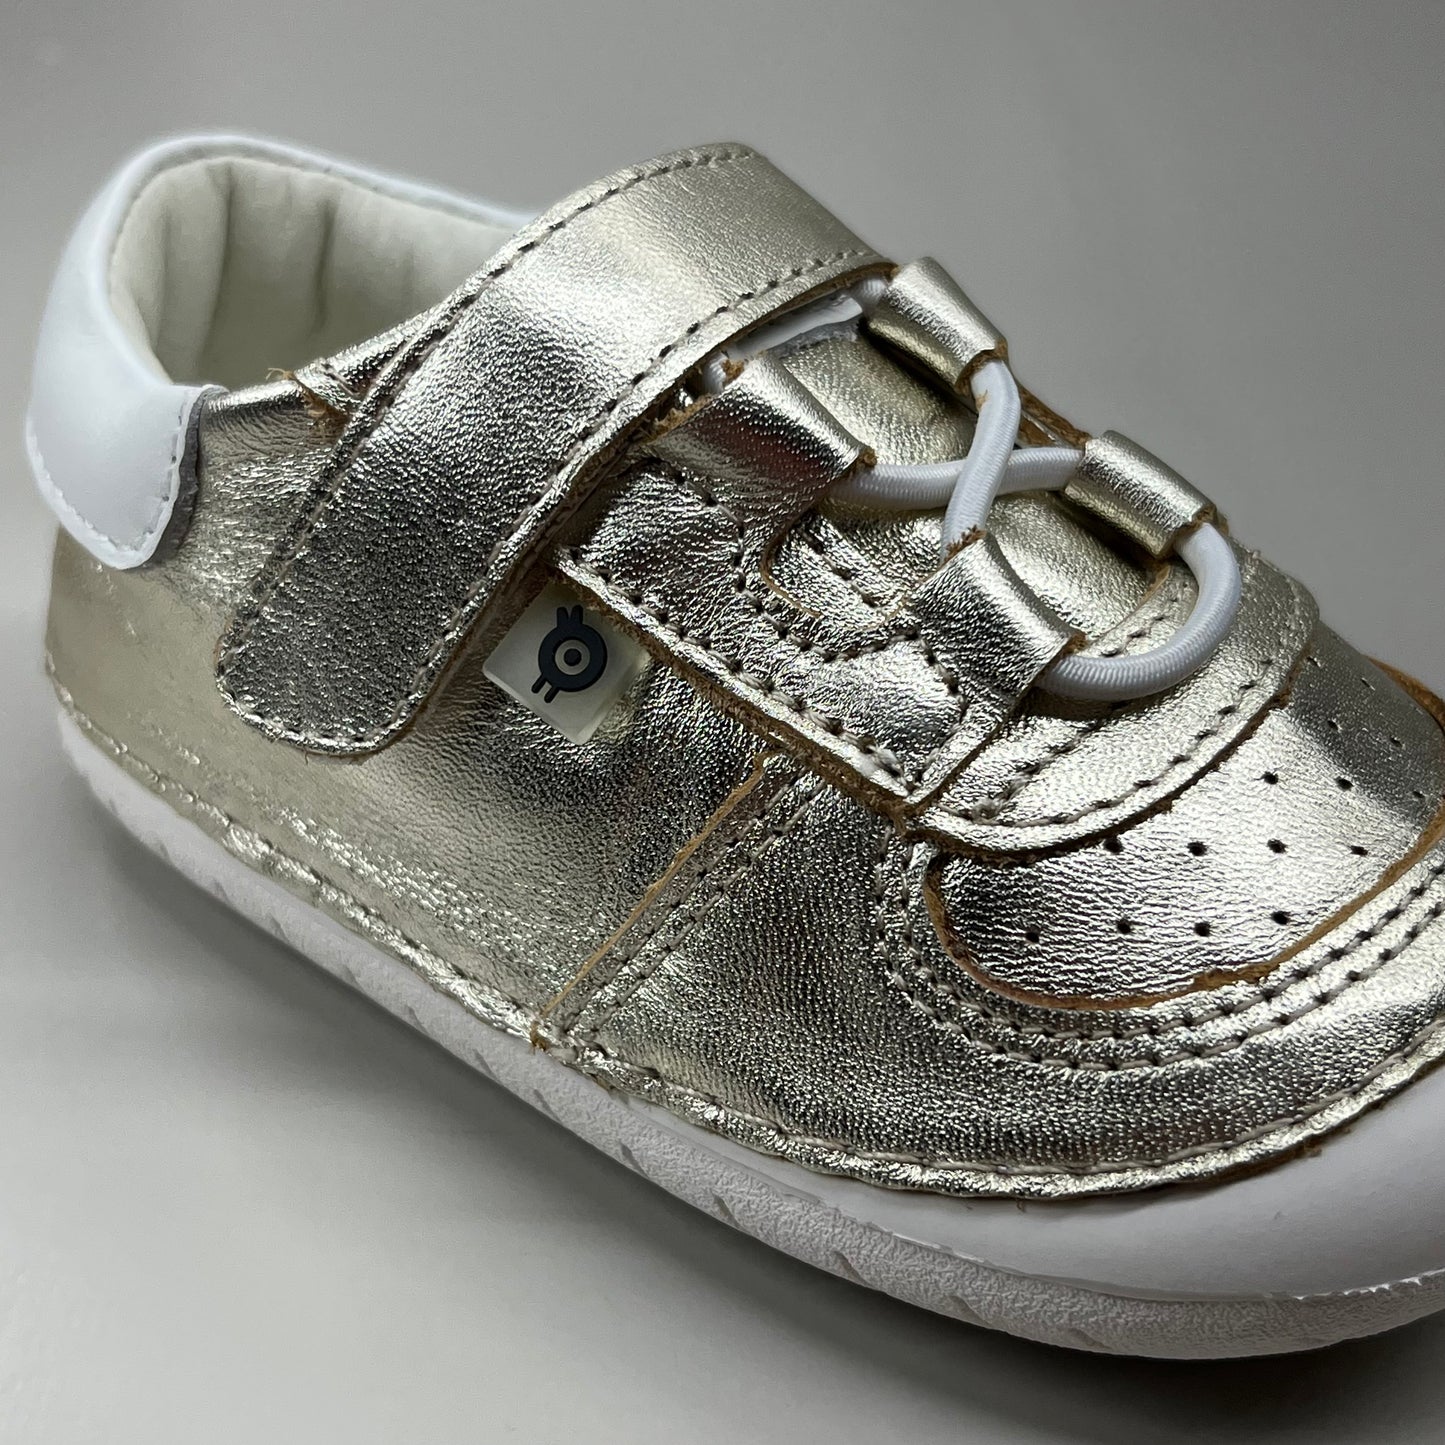 OLD SOLES Baby Rebel Pave Leather Shoe Sz 20 US 4 Gold/White #4090